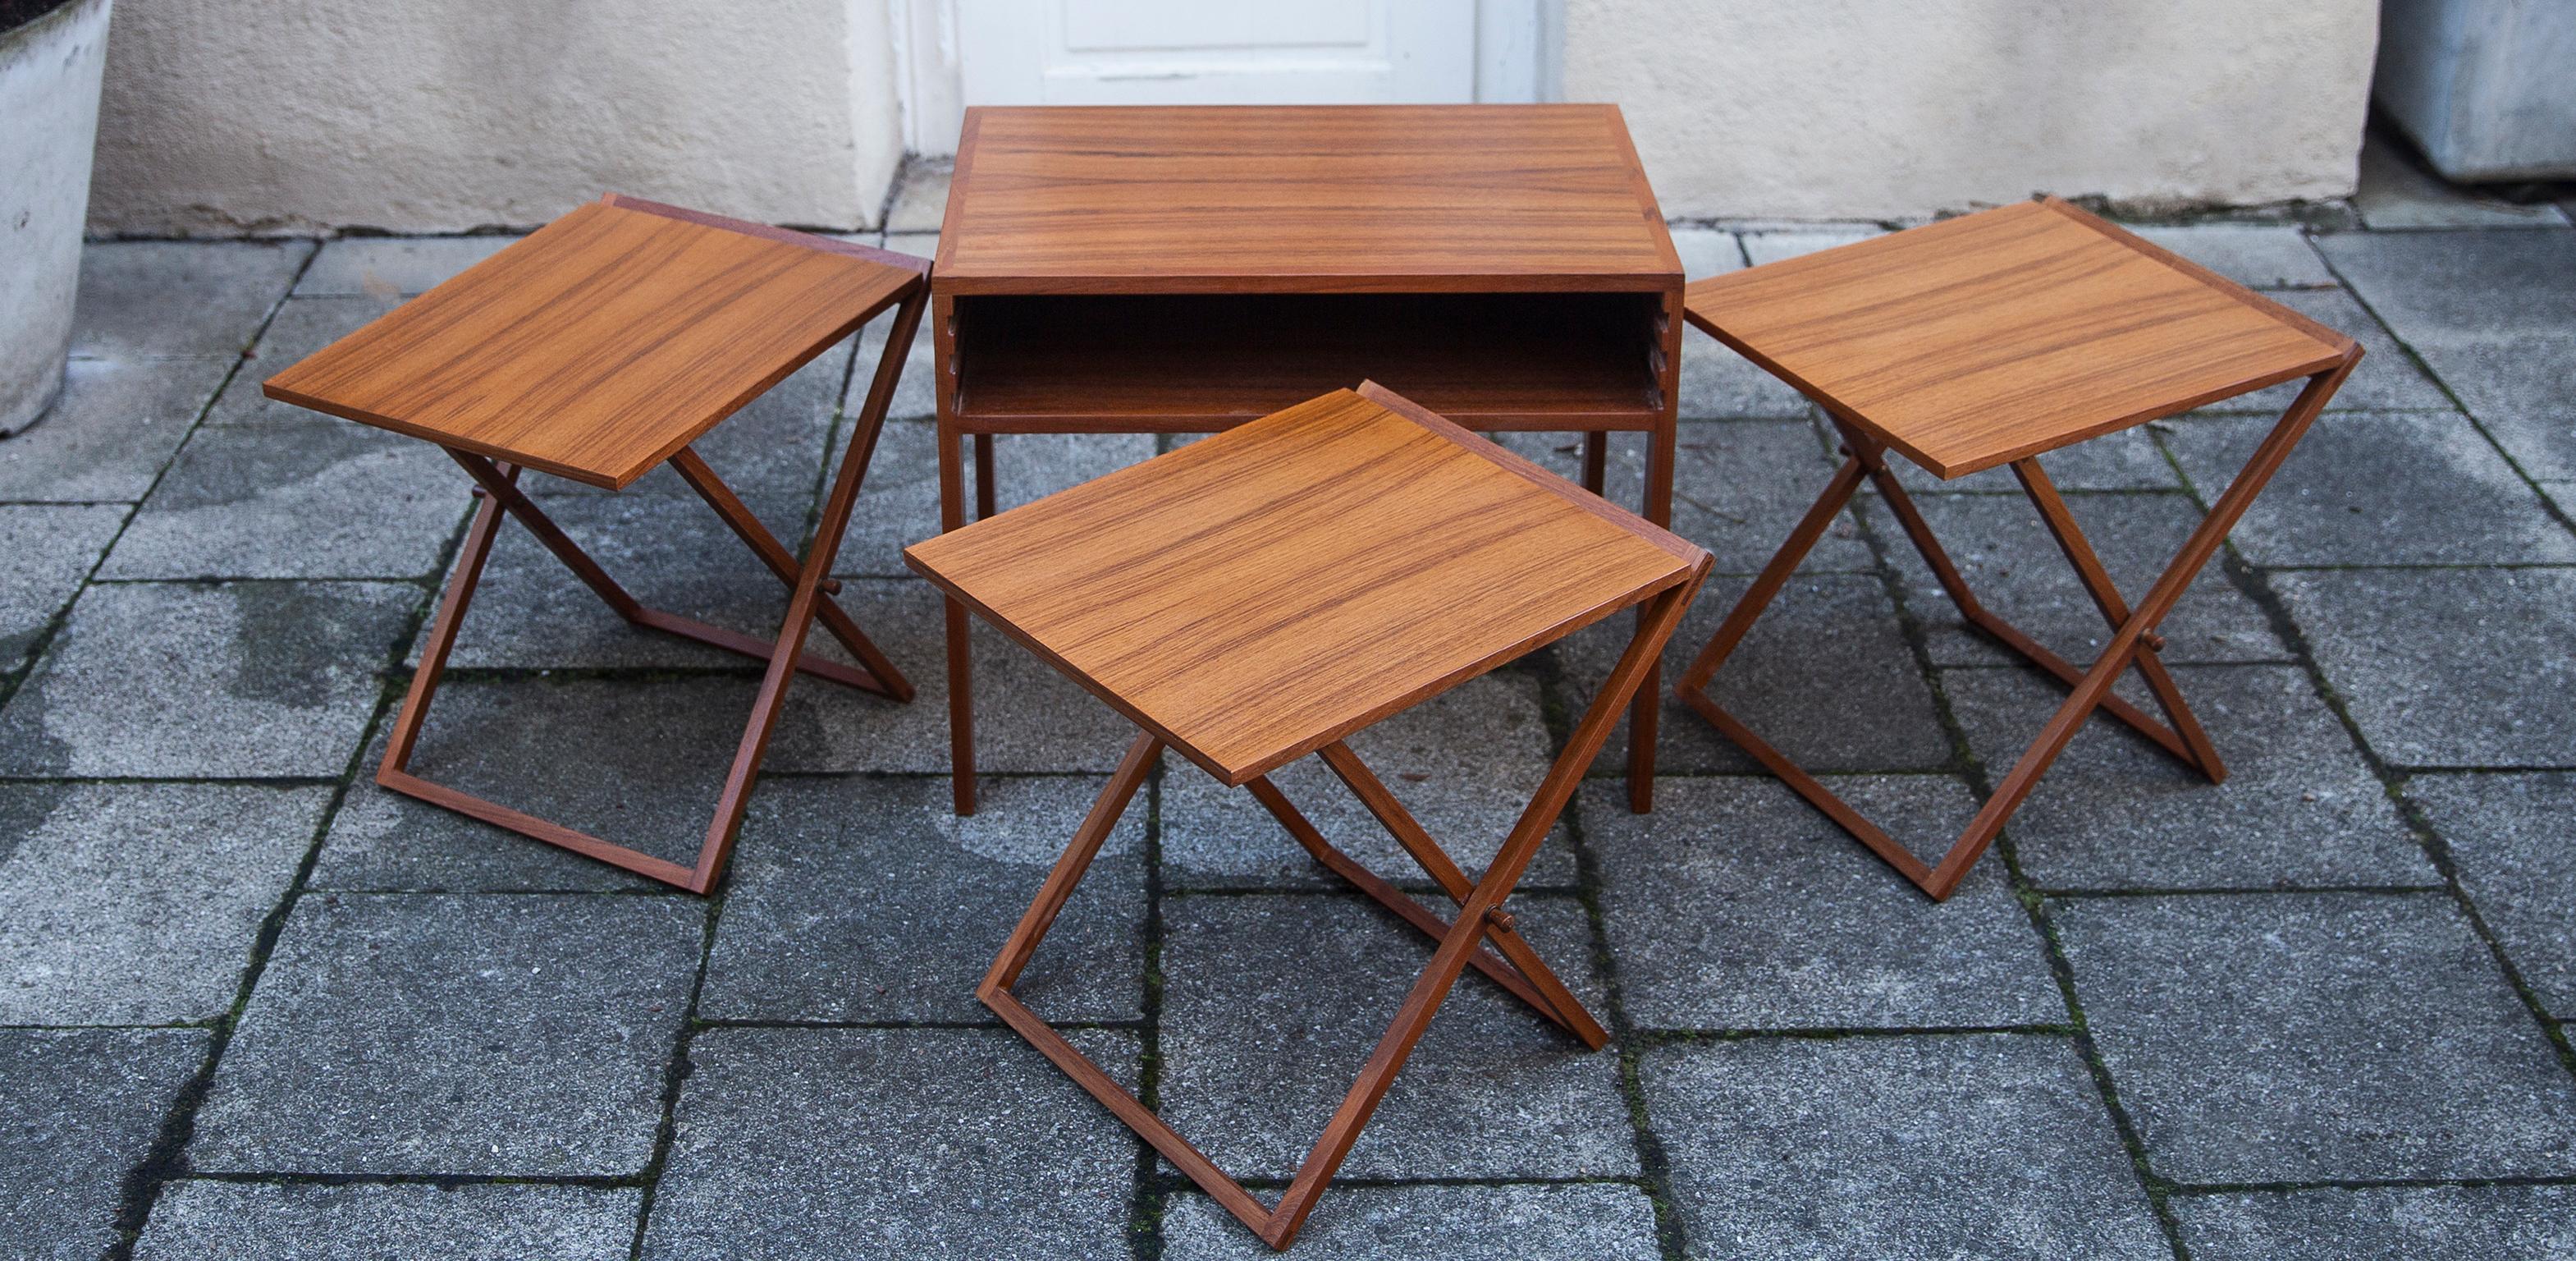 Illum Wikkelso Teak Folding Table, 1960s In Excellent Condition For Sale In Munich, DE